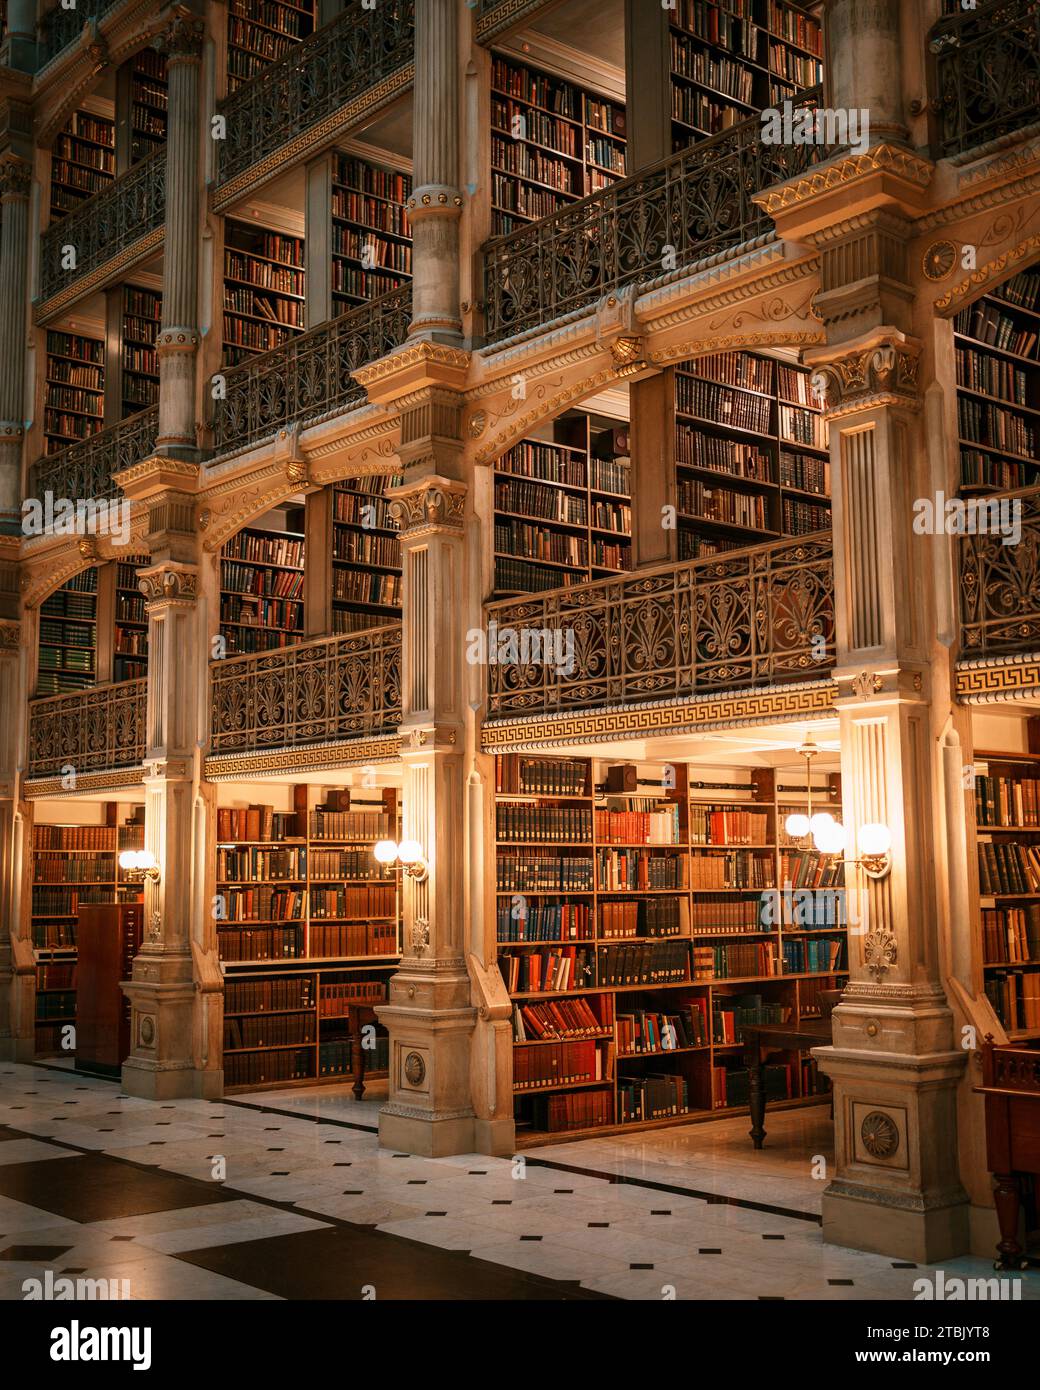 Interior architecture of the George Peabody Library in Mount Vernon, Baltimore, Maryland Stock Photo